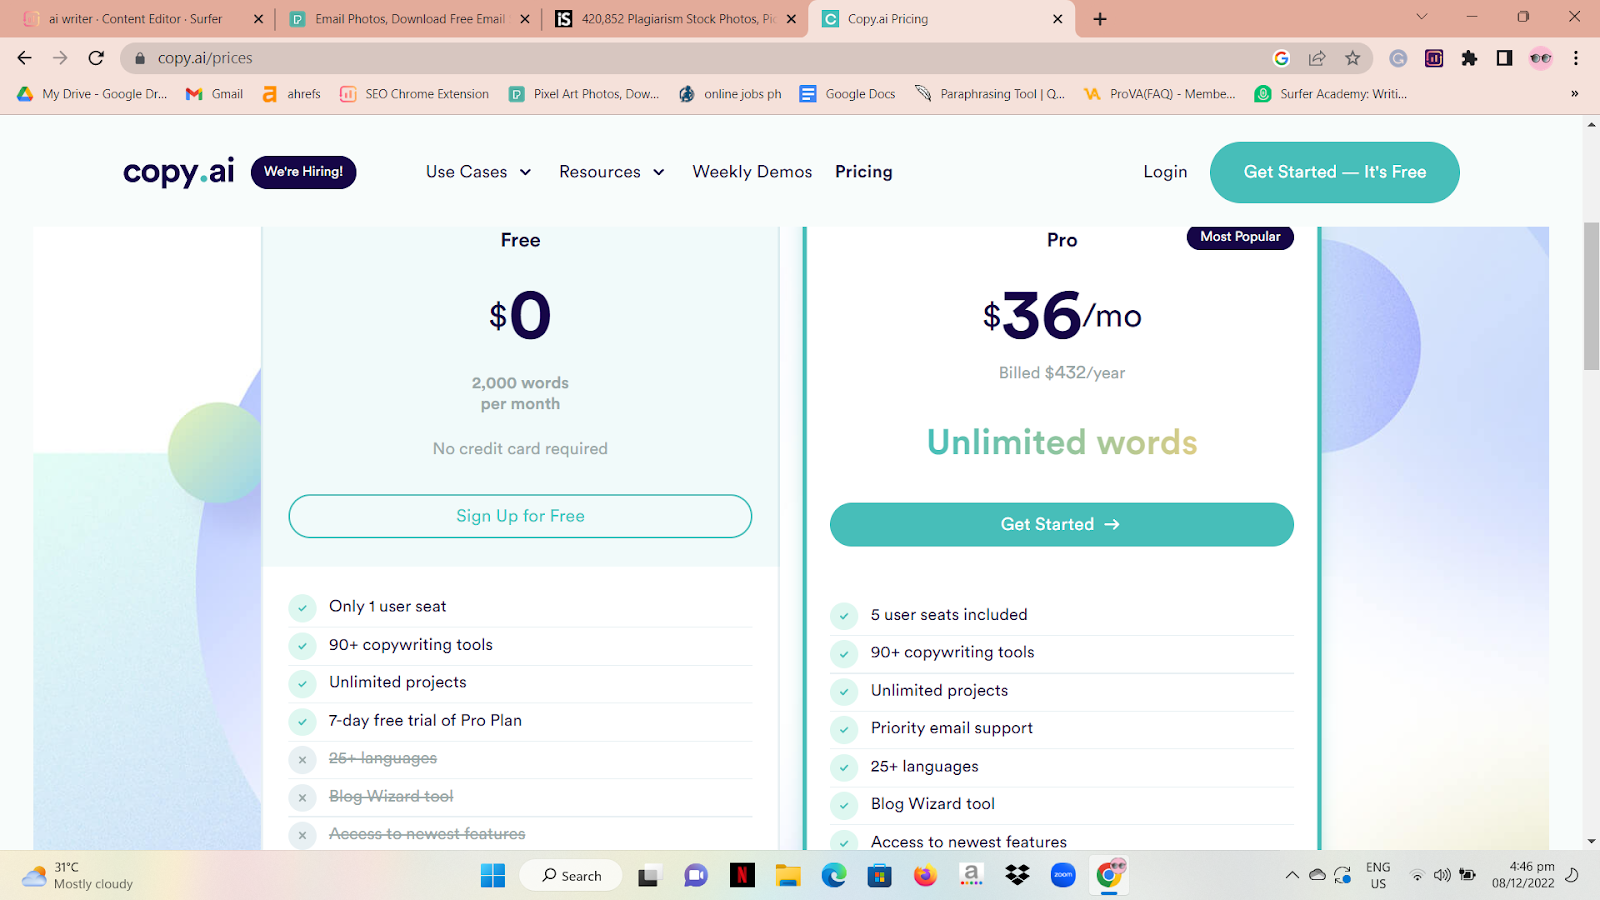 Copy.AI AI Writing Tool: Cost And Price Plans